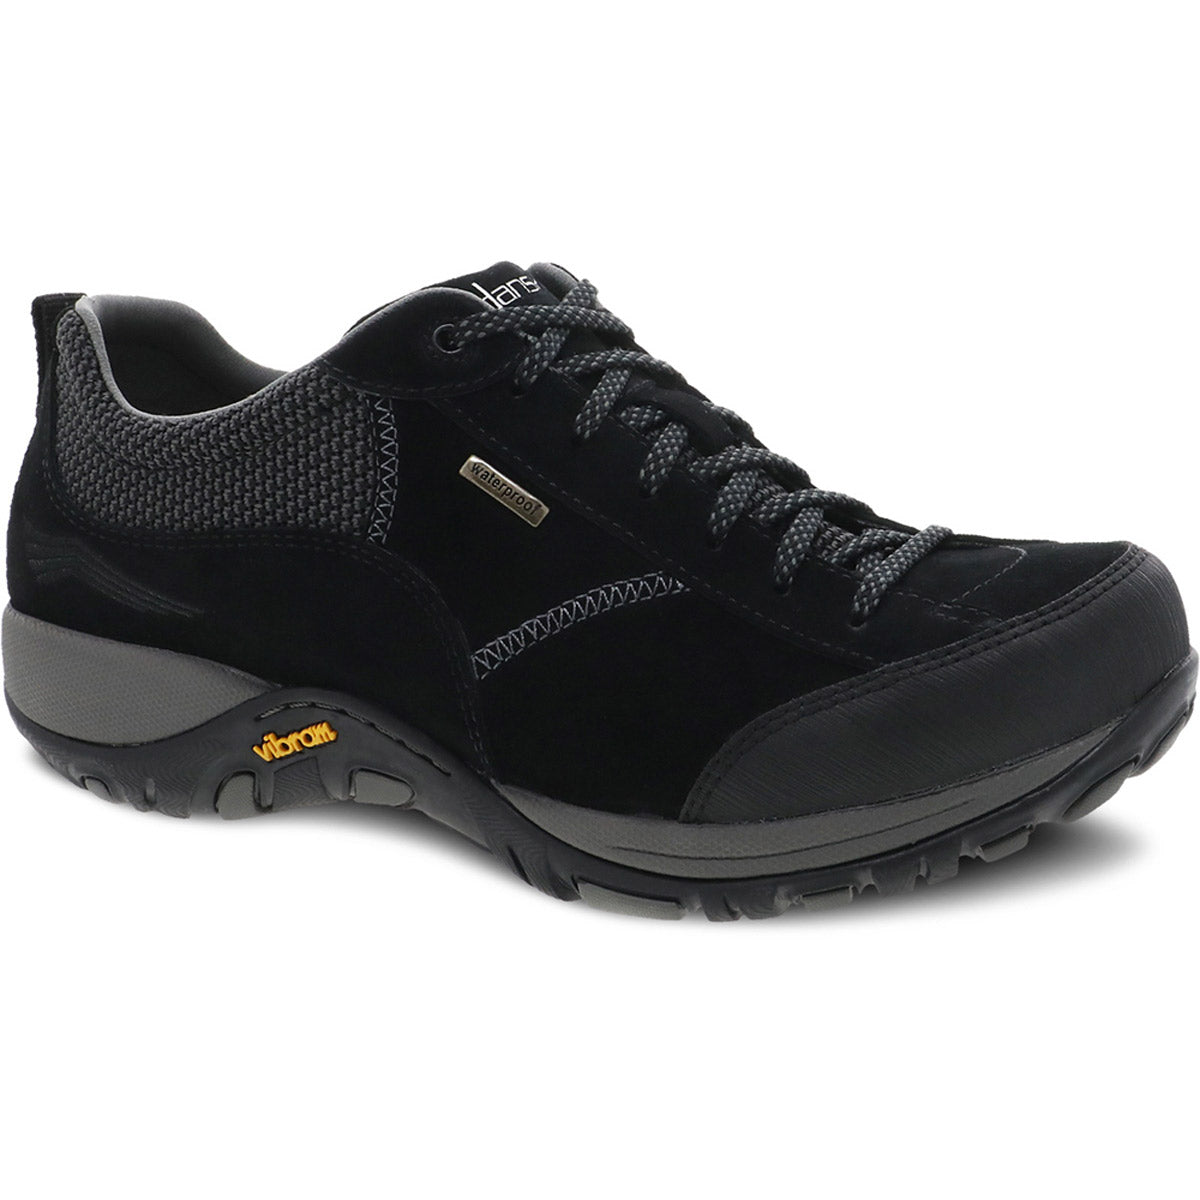 Dansko hiking shoe with a slip-resistant Vibram® rubber outsole and waterproof leather uppers.